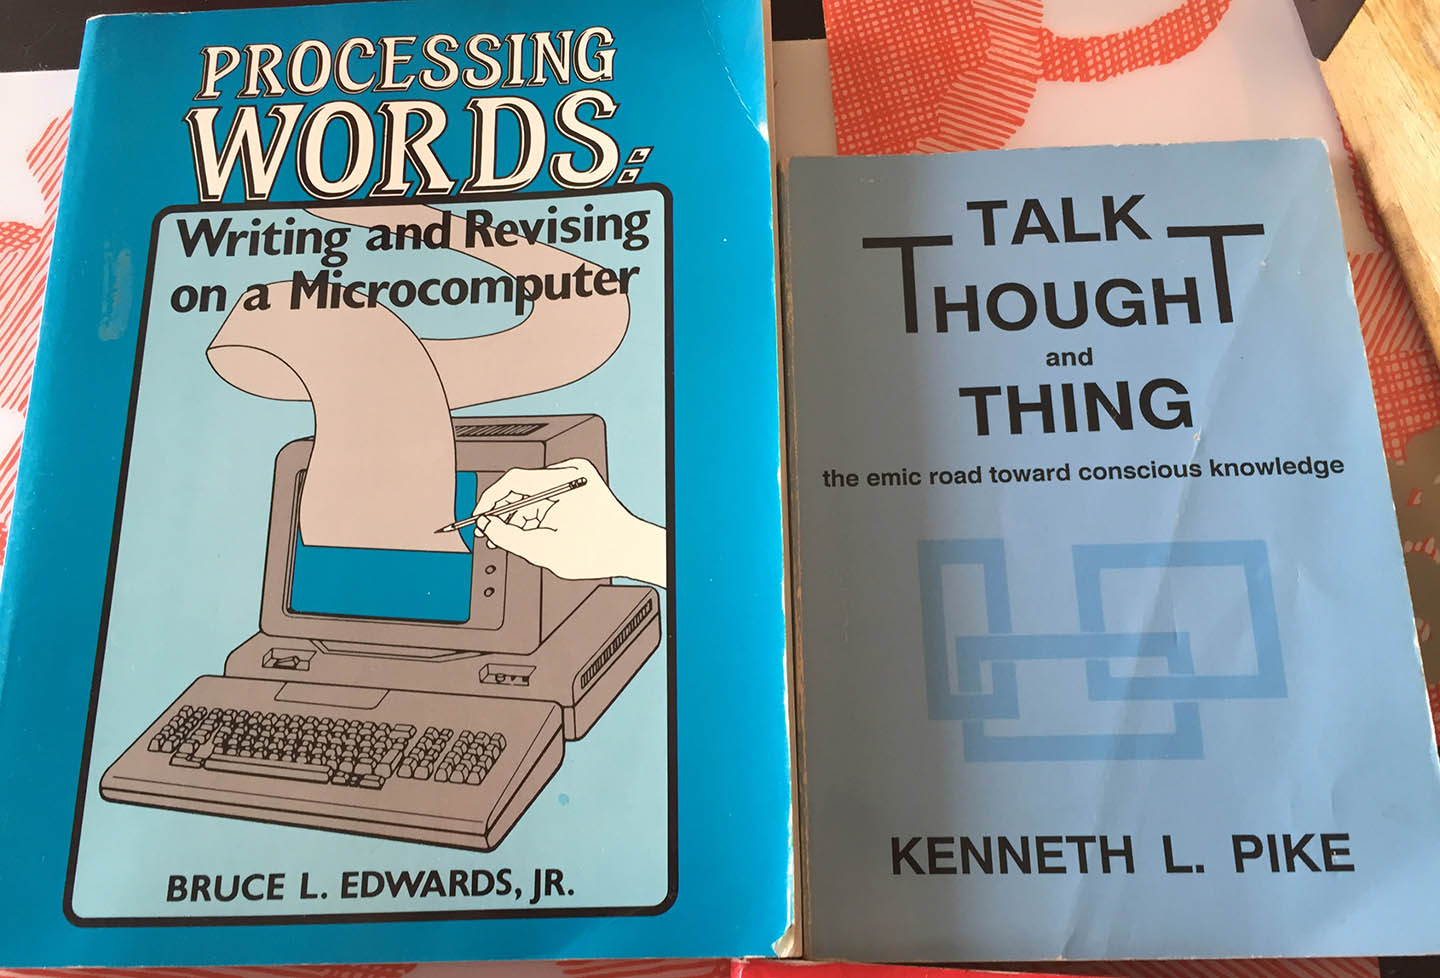 Processing Words, my dad's textbook about writing with a computer!